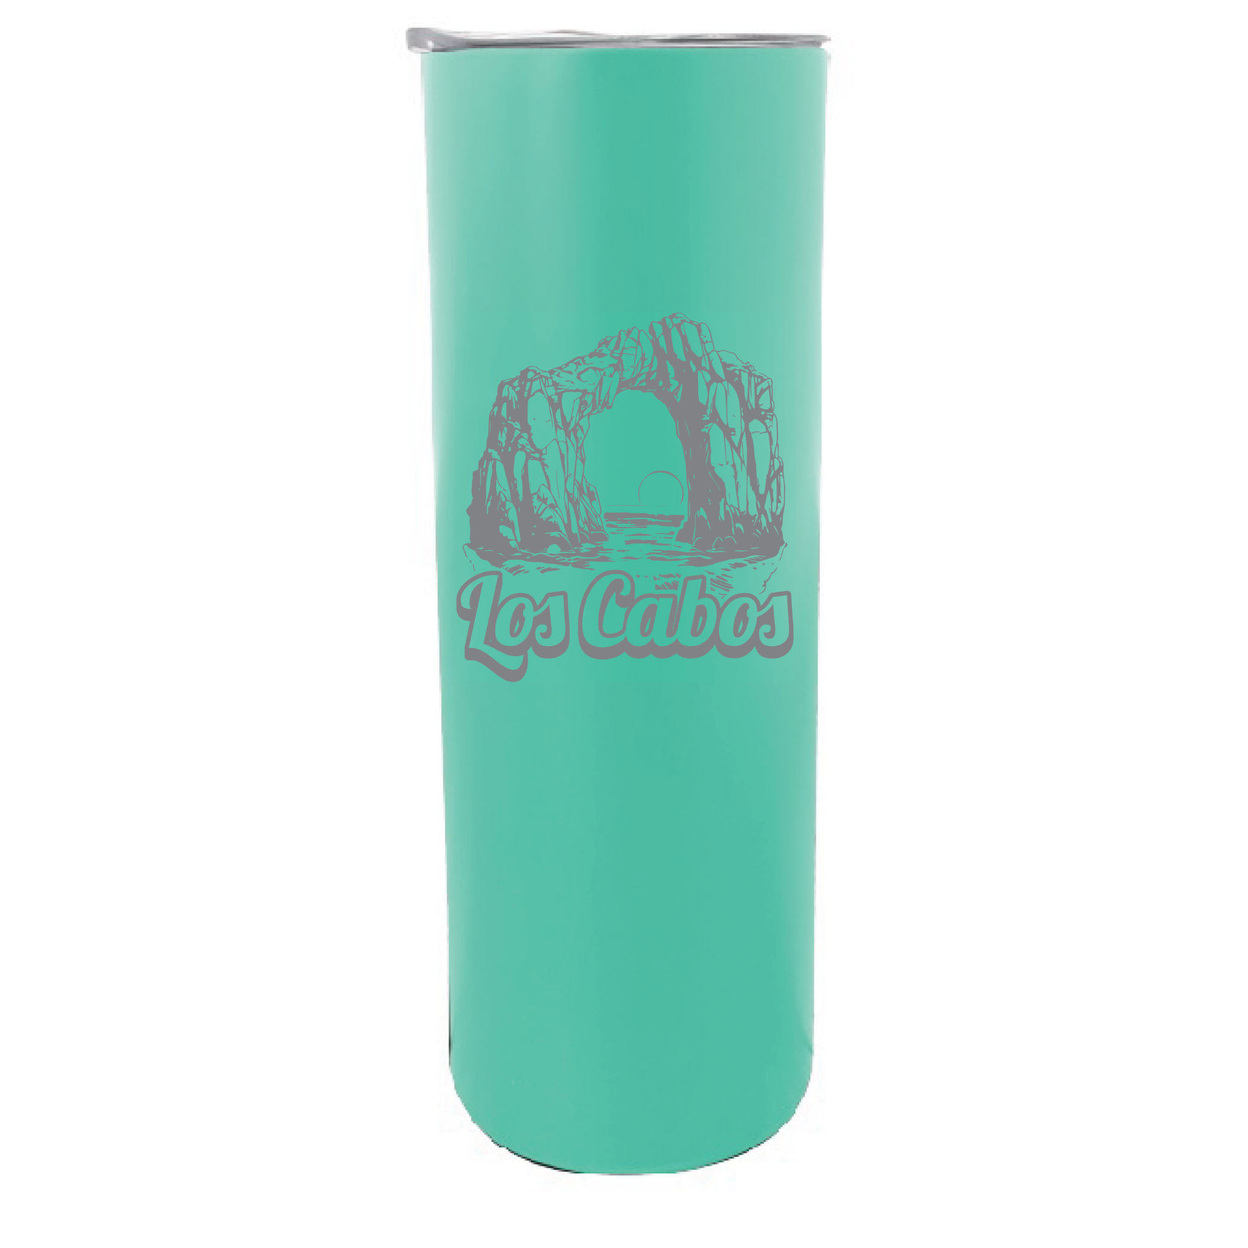 Los Cabos Mexico Souvenir 20 Oz Engraved Insulated Stainless Steel Skinny Tumbler - Gray Glitter,,4-Pack